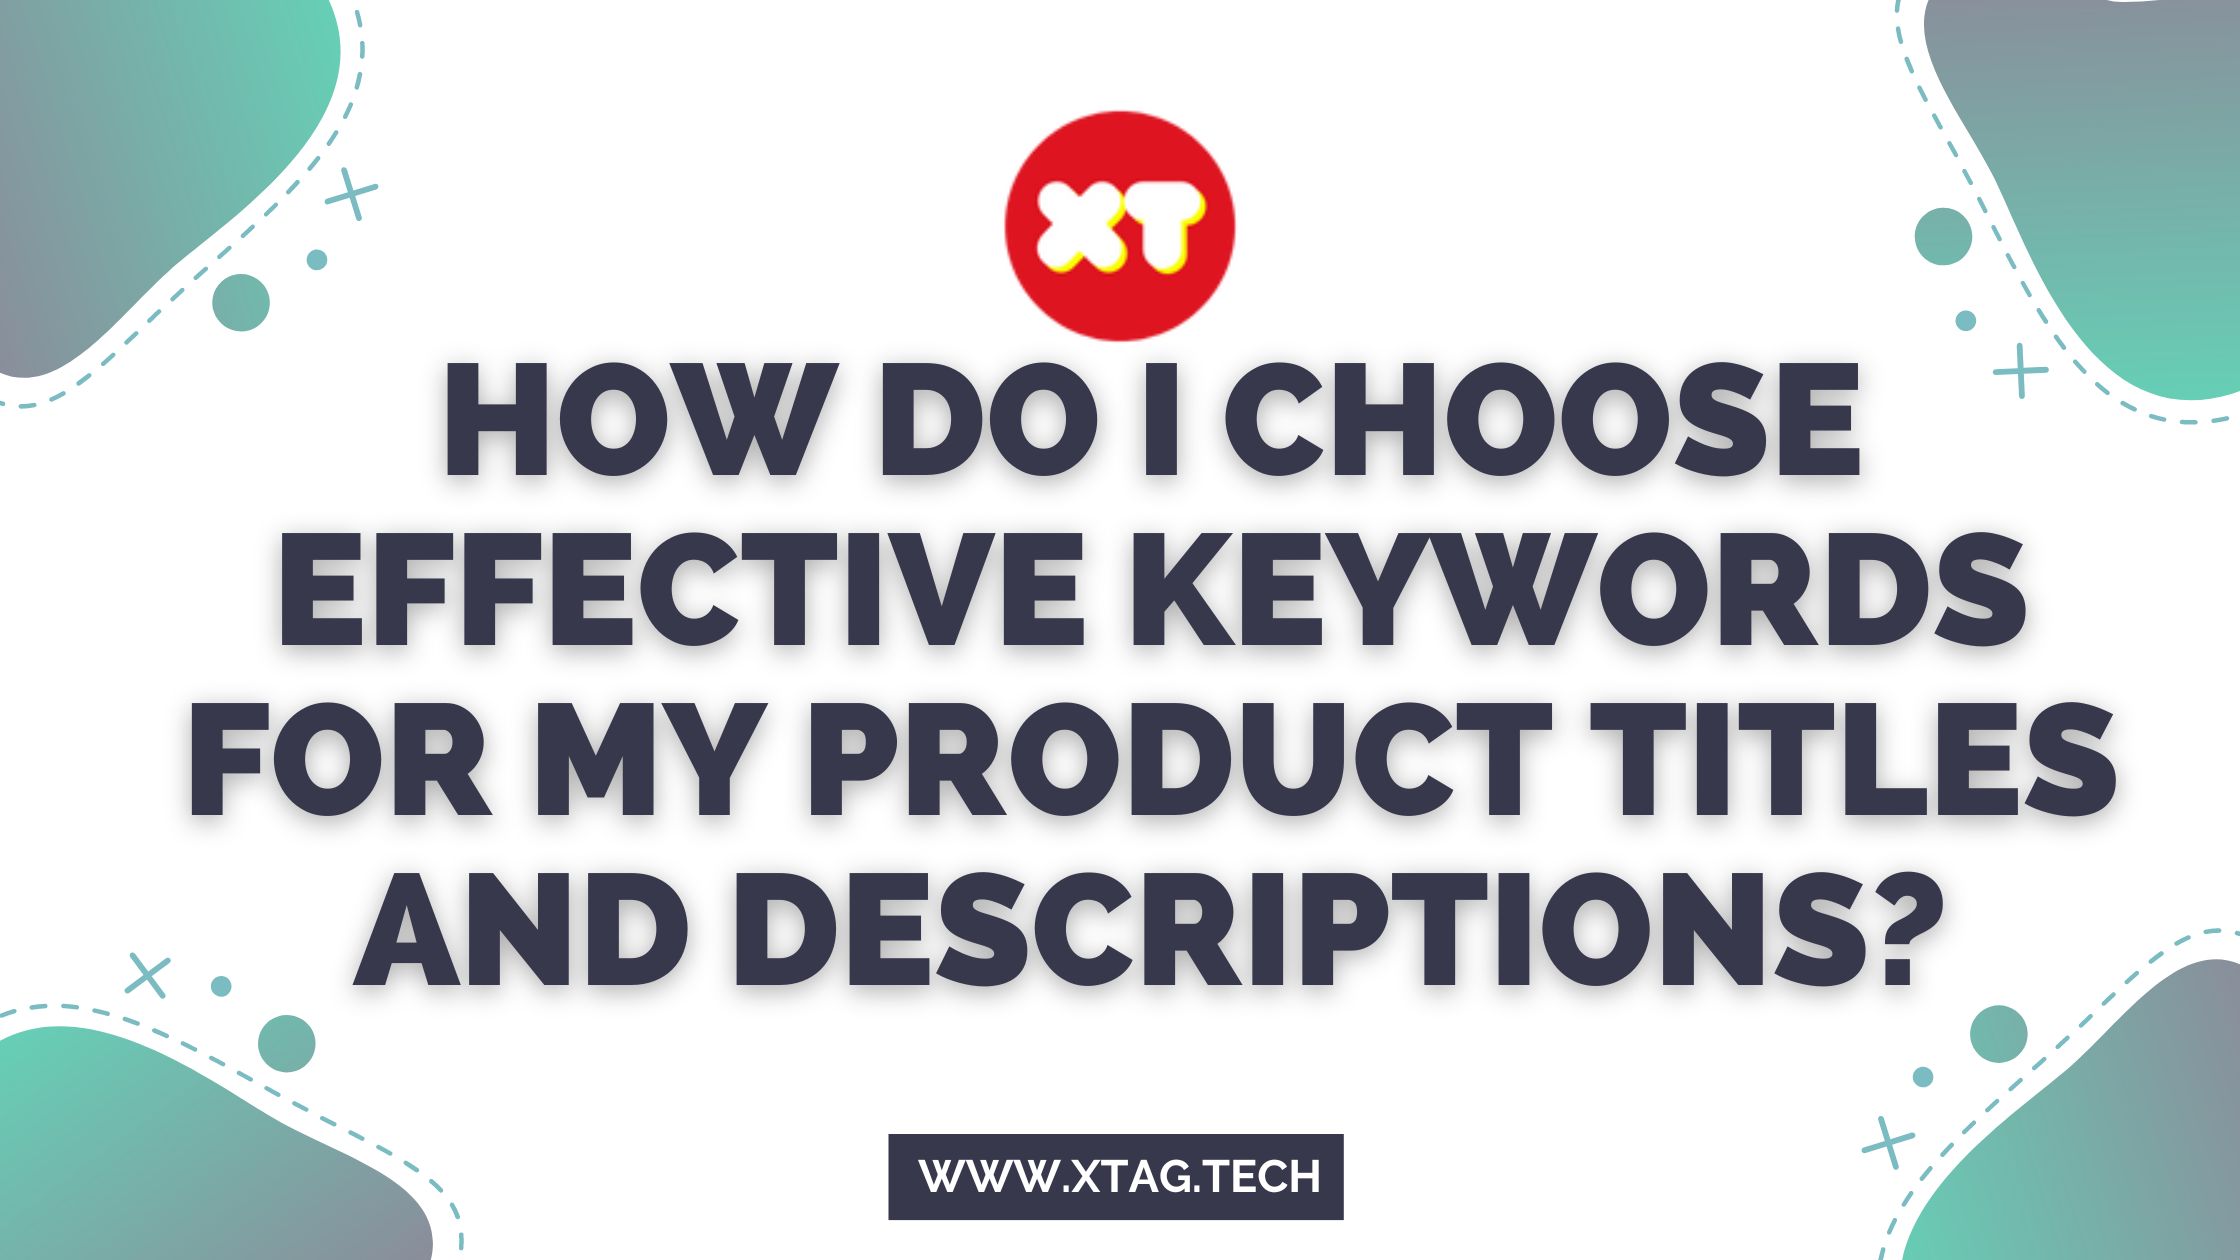 How Do I Choose Effective Keywords For My Product Titles And Descriptions?